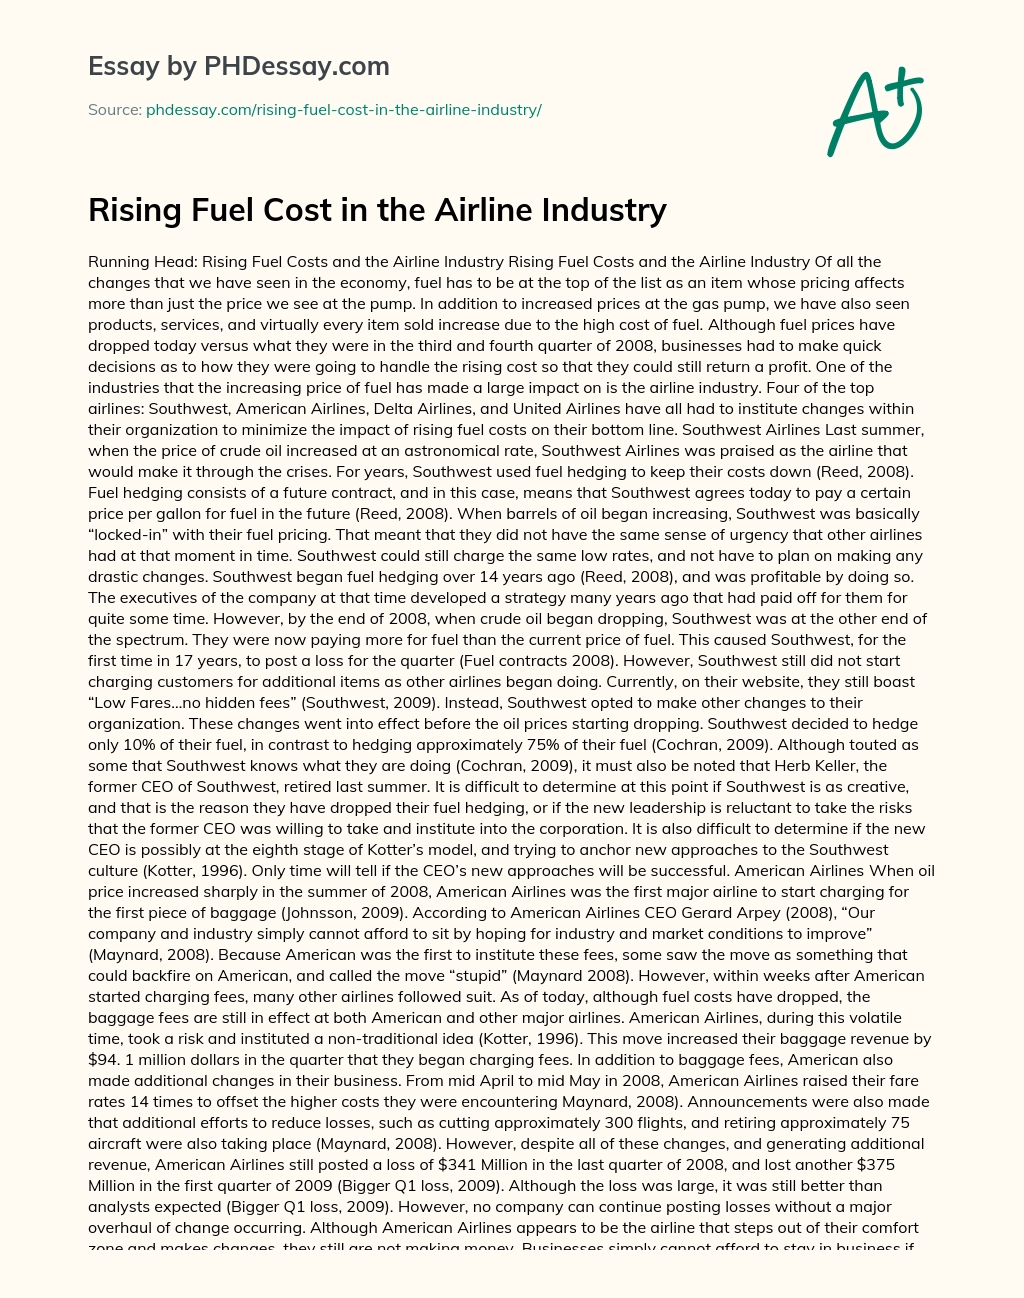 Rising Fuel Cost in the Airline Industry essay